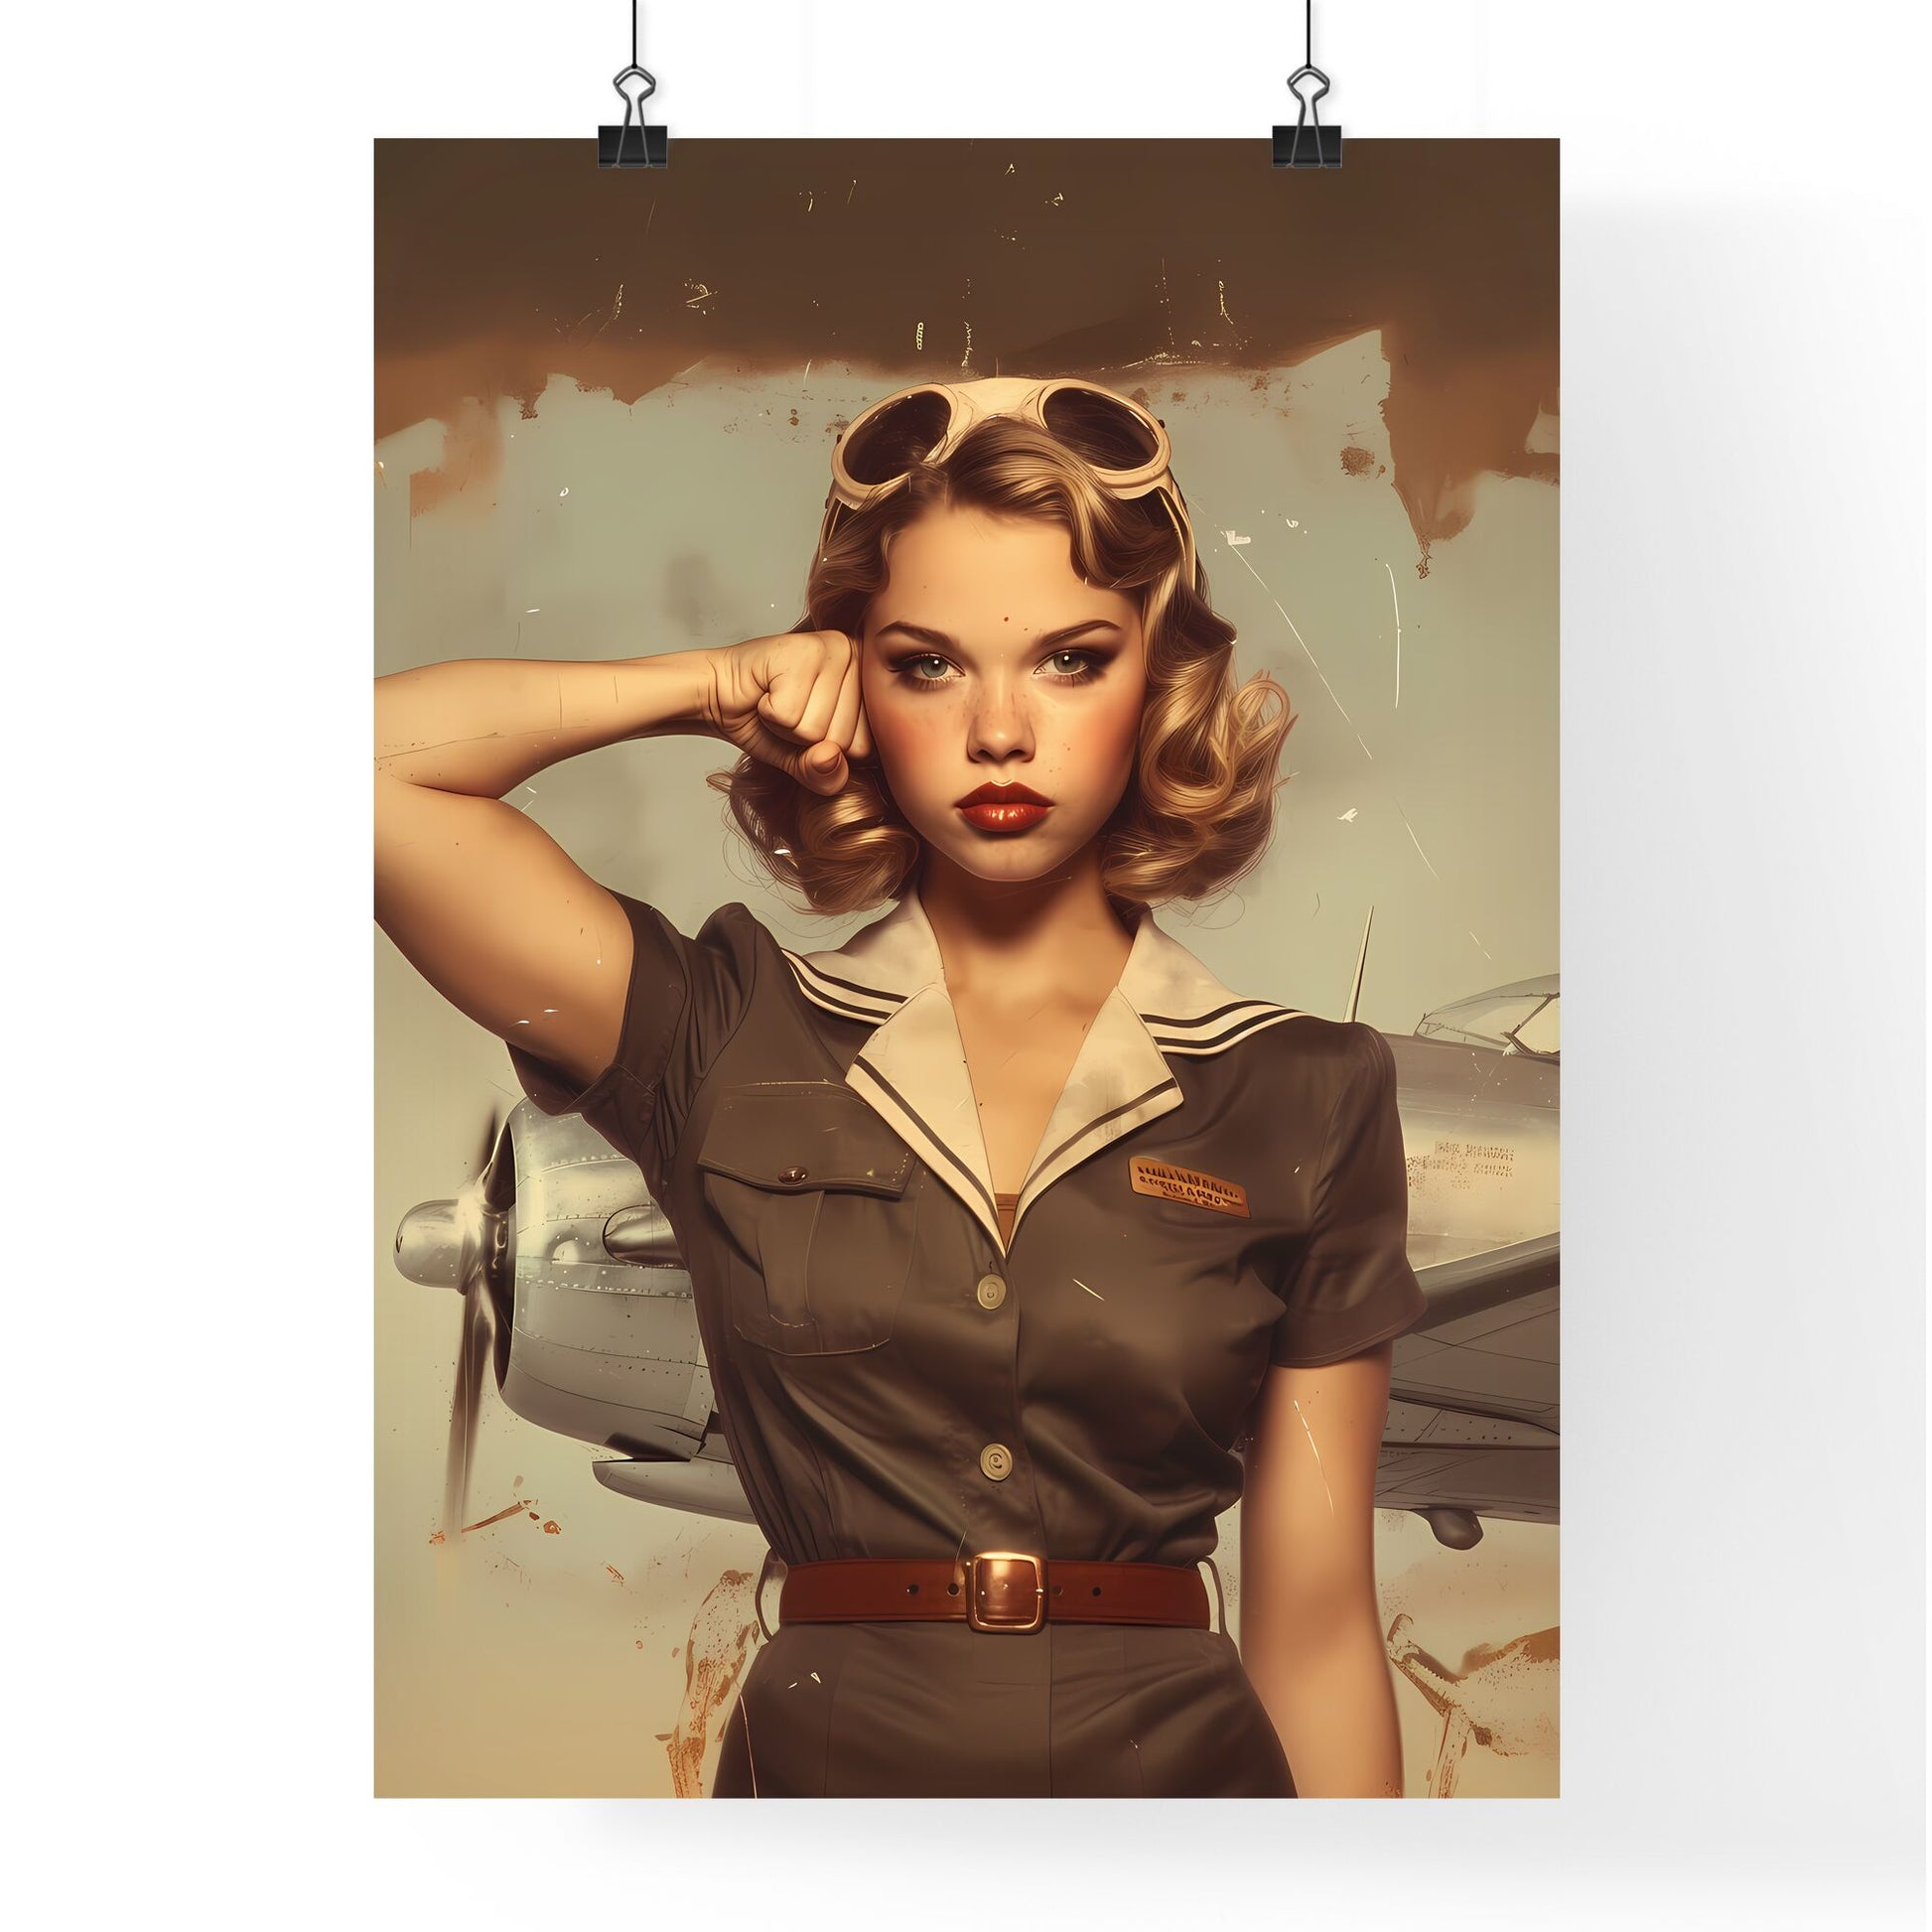 You can do it woman, vintage artwork, flexing bicep, wearing flight attendant uniform, making a serious face - Art print of a woman in uniform with goggles on her head Default Title